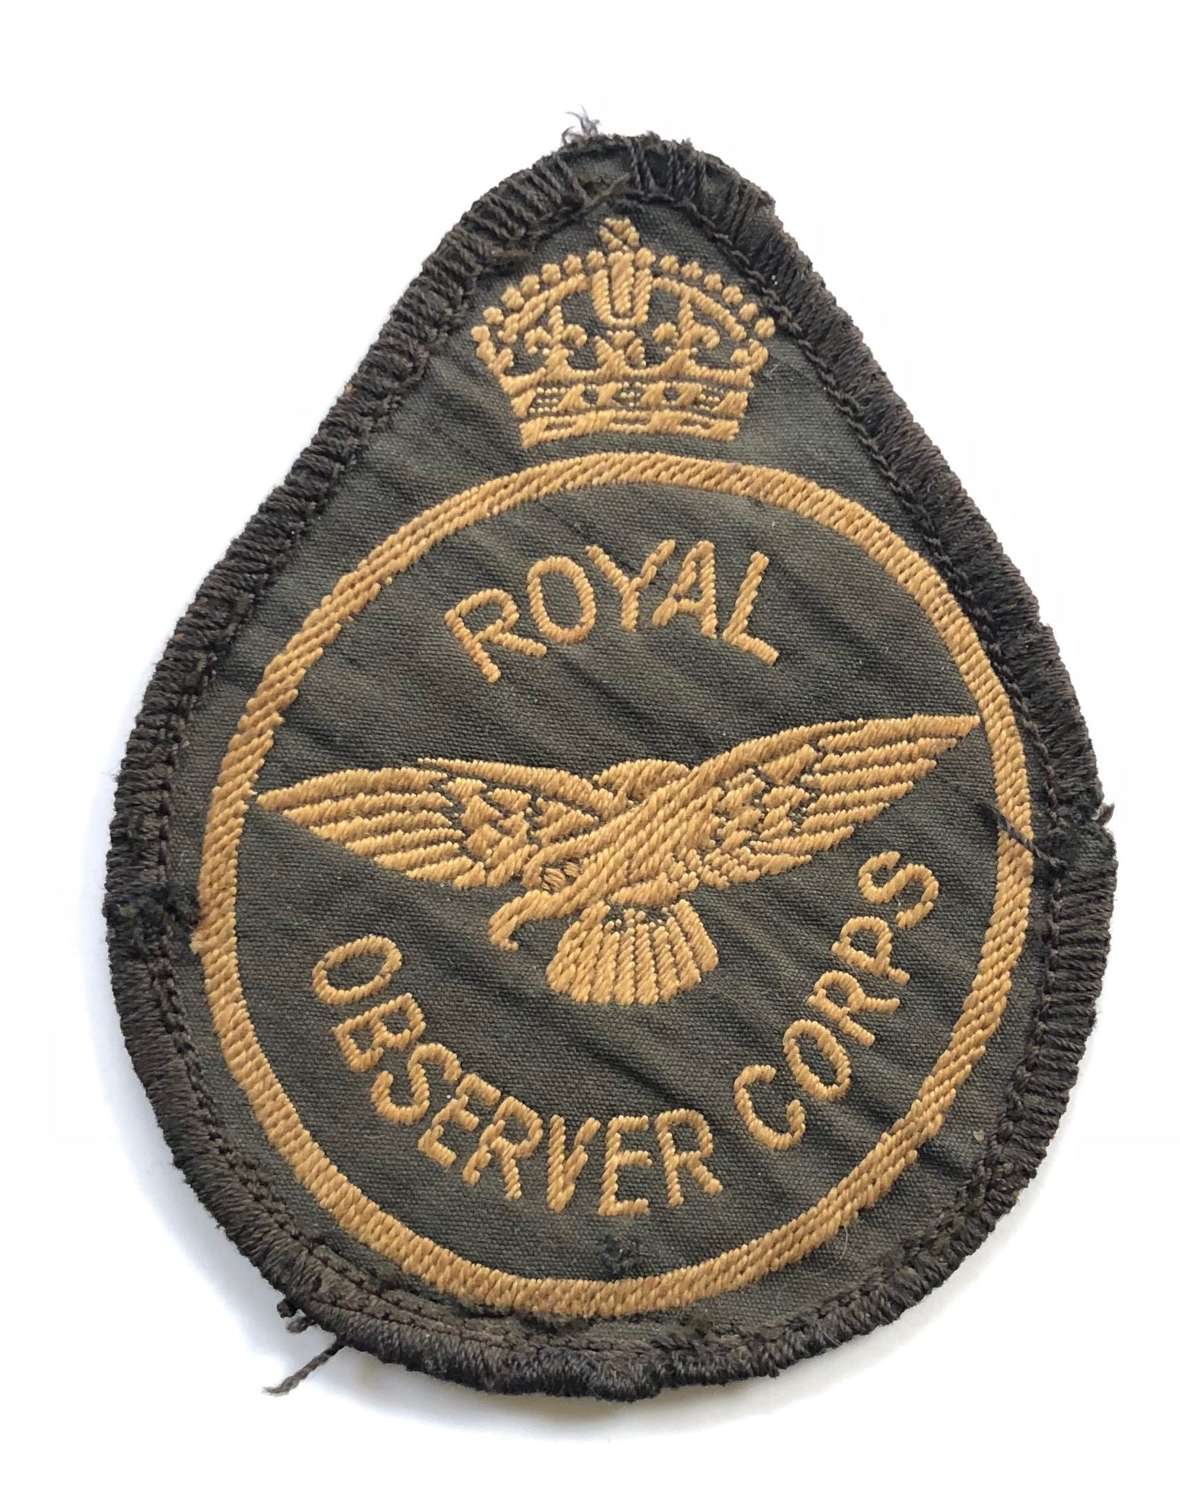 WW2 Period Royal Observer Corps Breast Badge.